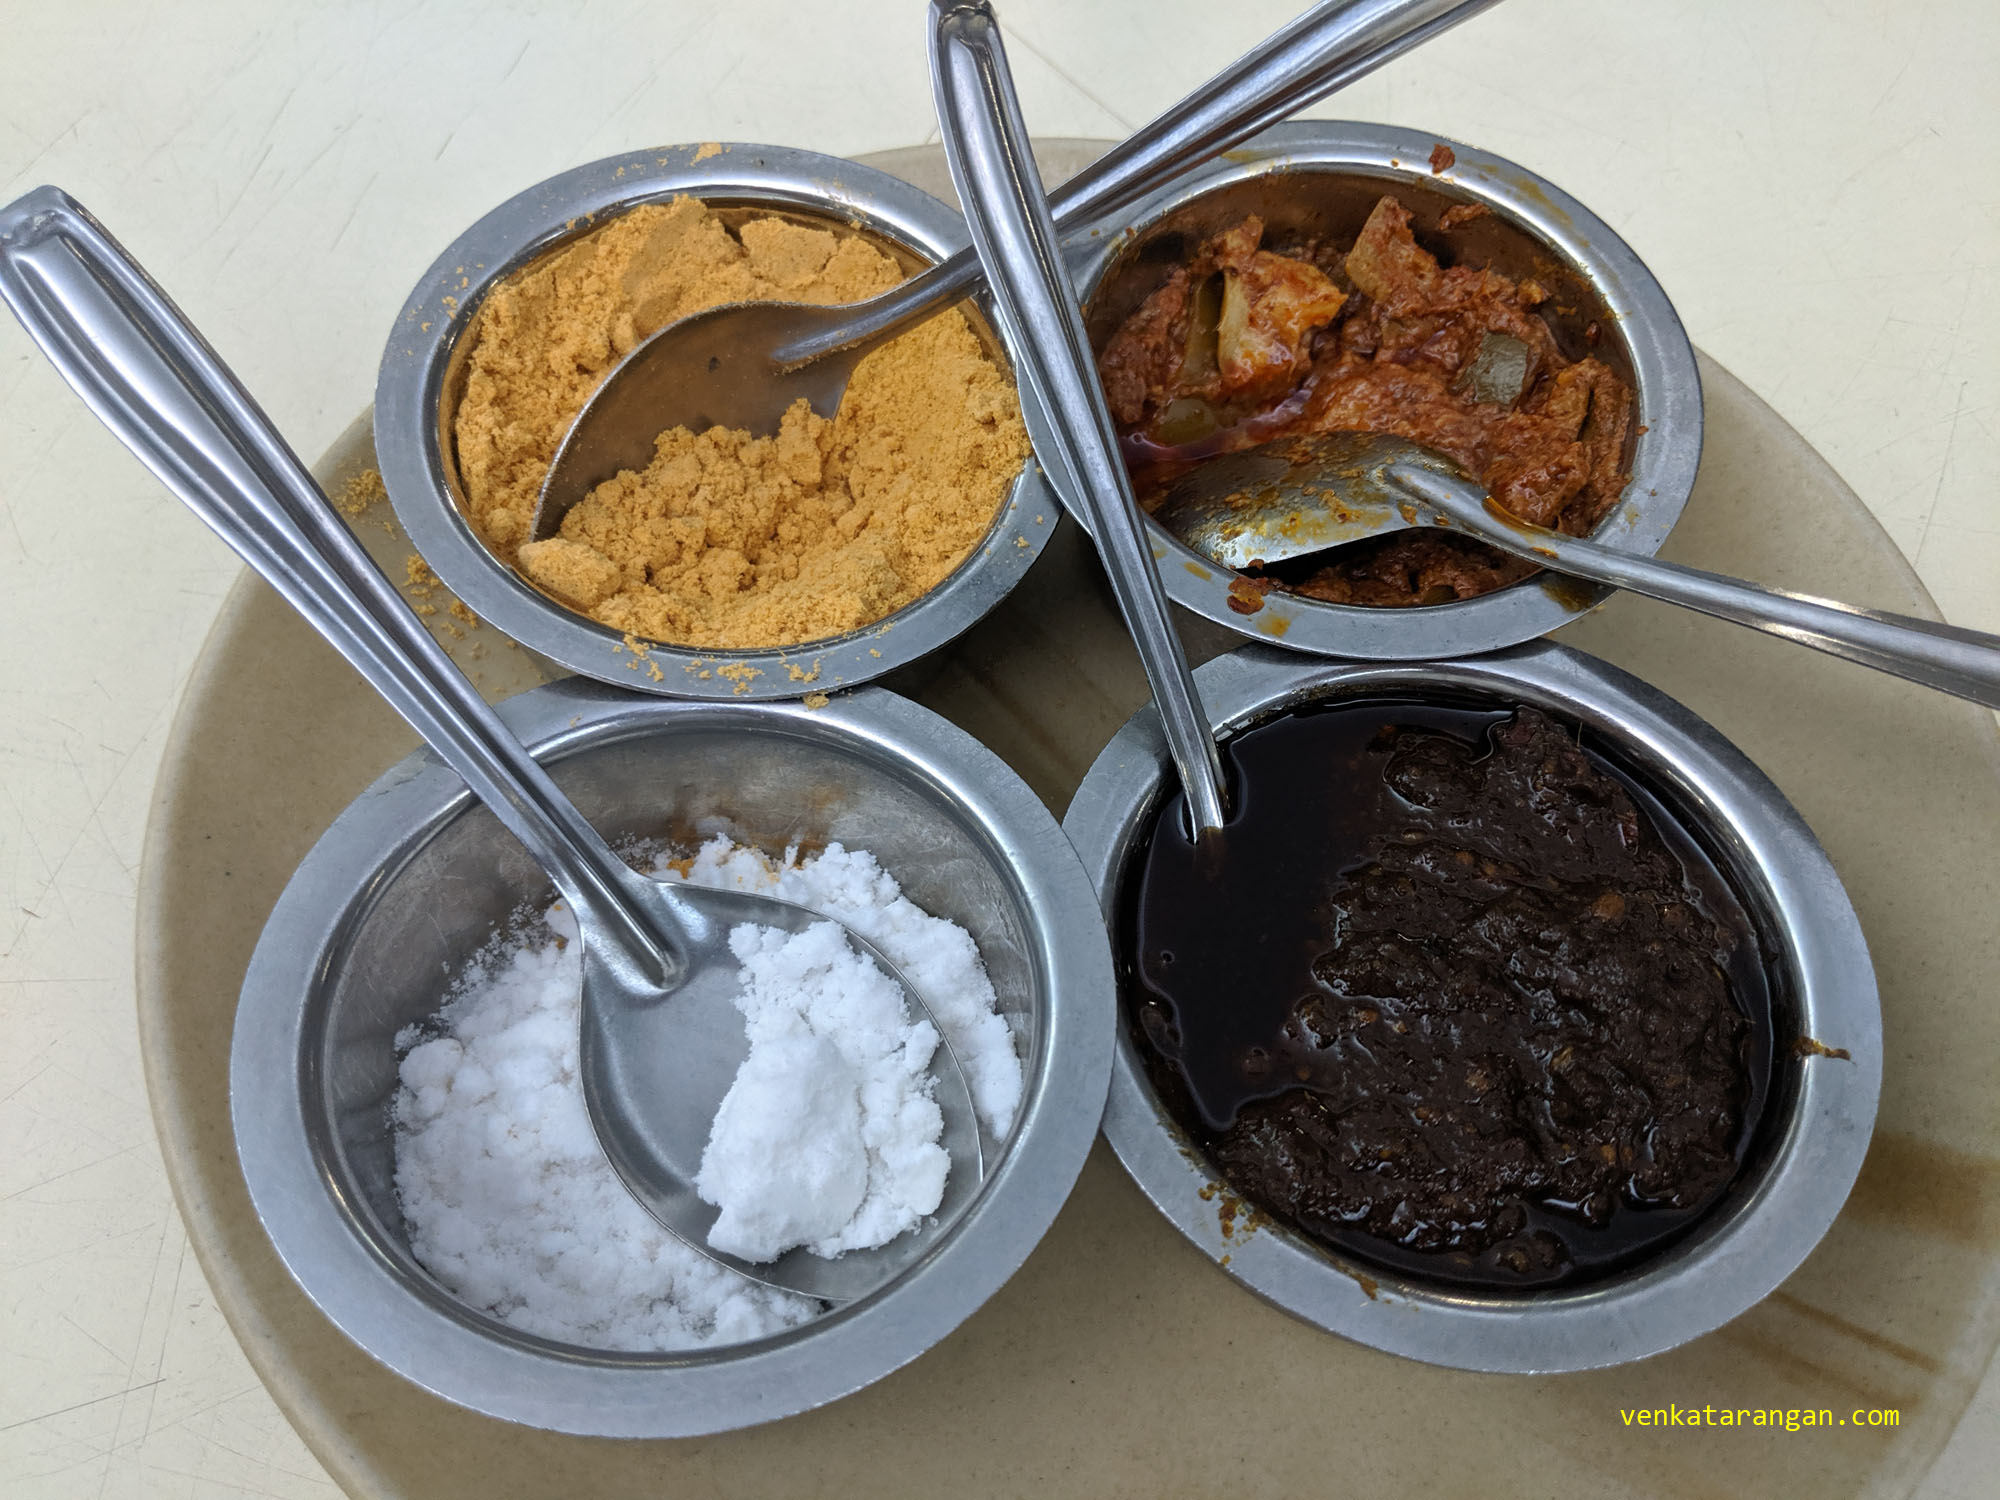 Condiments tray - (Clockwise from left top) Dal Powder to be mixed with Rice; Avakkai Mango Pickle; Gongura pickle; and Salt